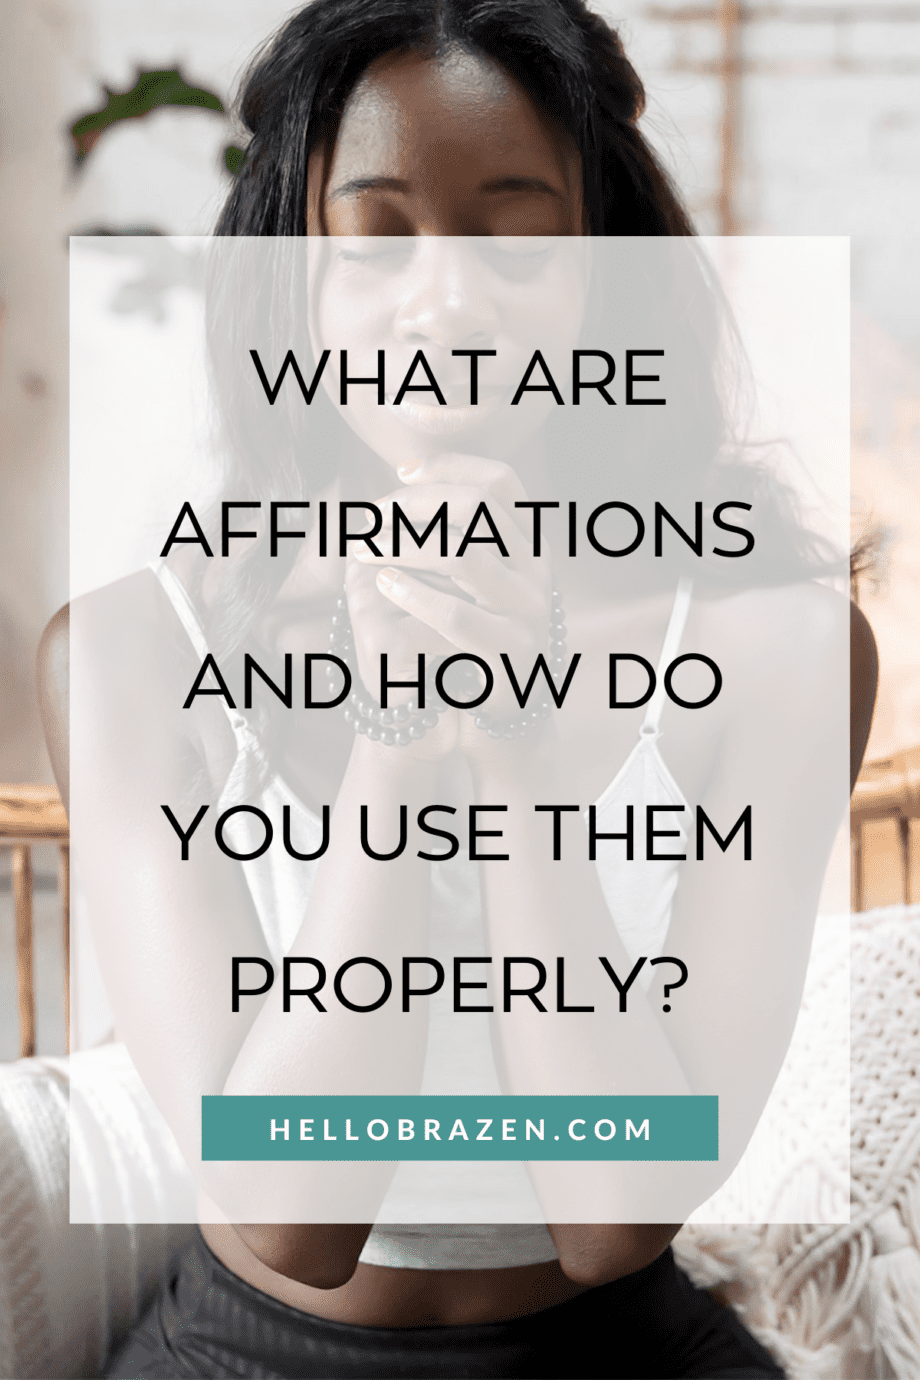 What are affirmations and how do you use them properly? Positive affirmations are a great tool to help you create thought patterns and actions that create positive change, and can help boost your self-confidence and self esteem by focusing on the positive areas of your life.